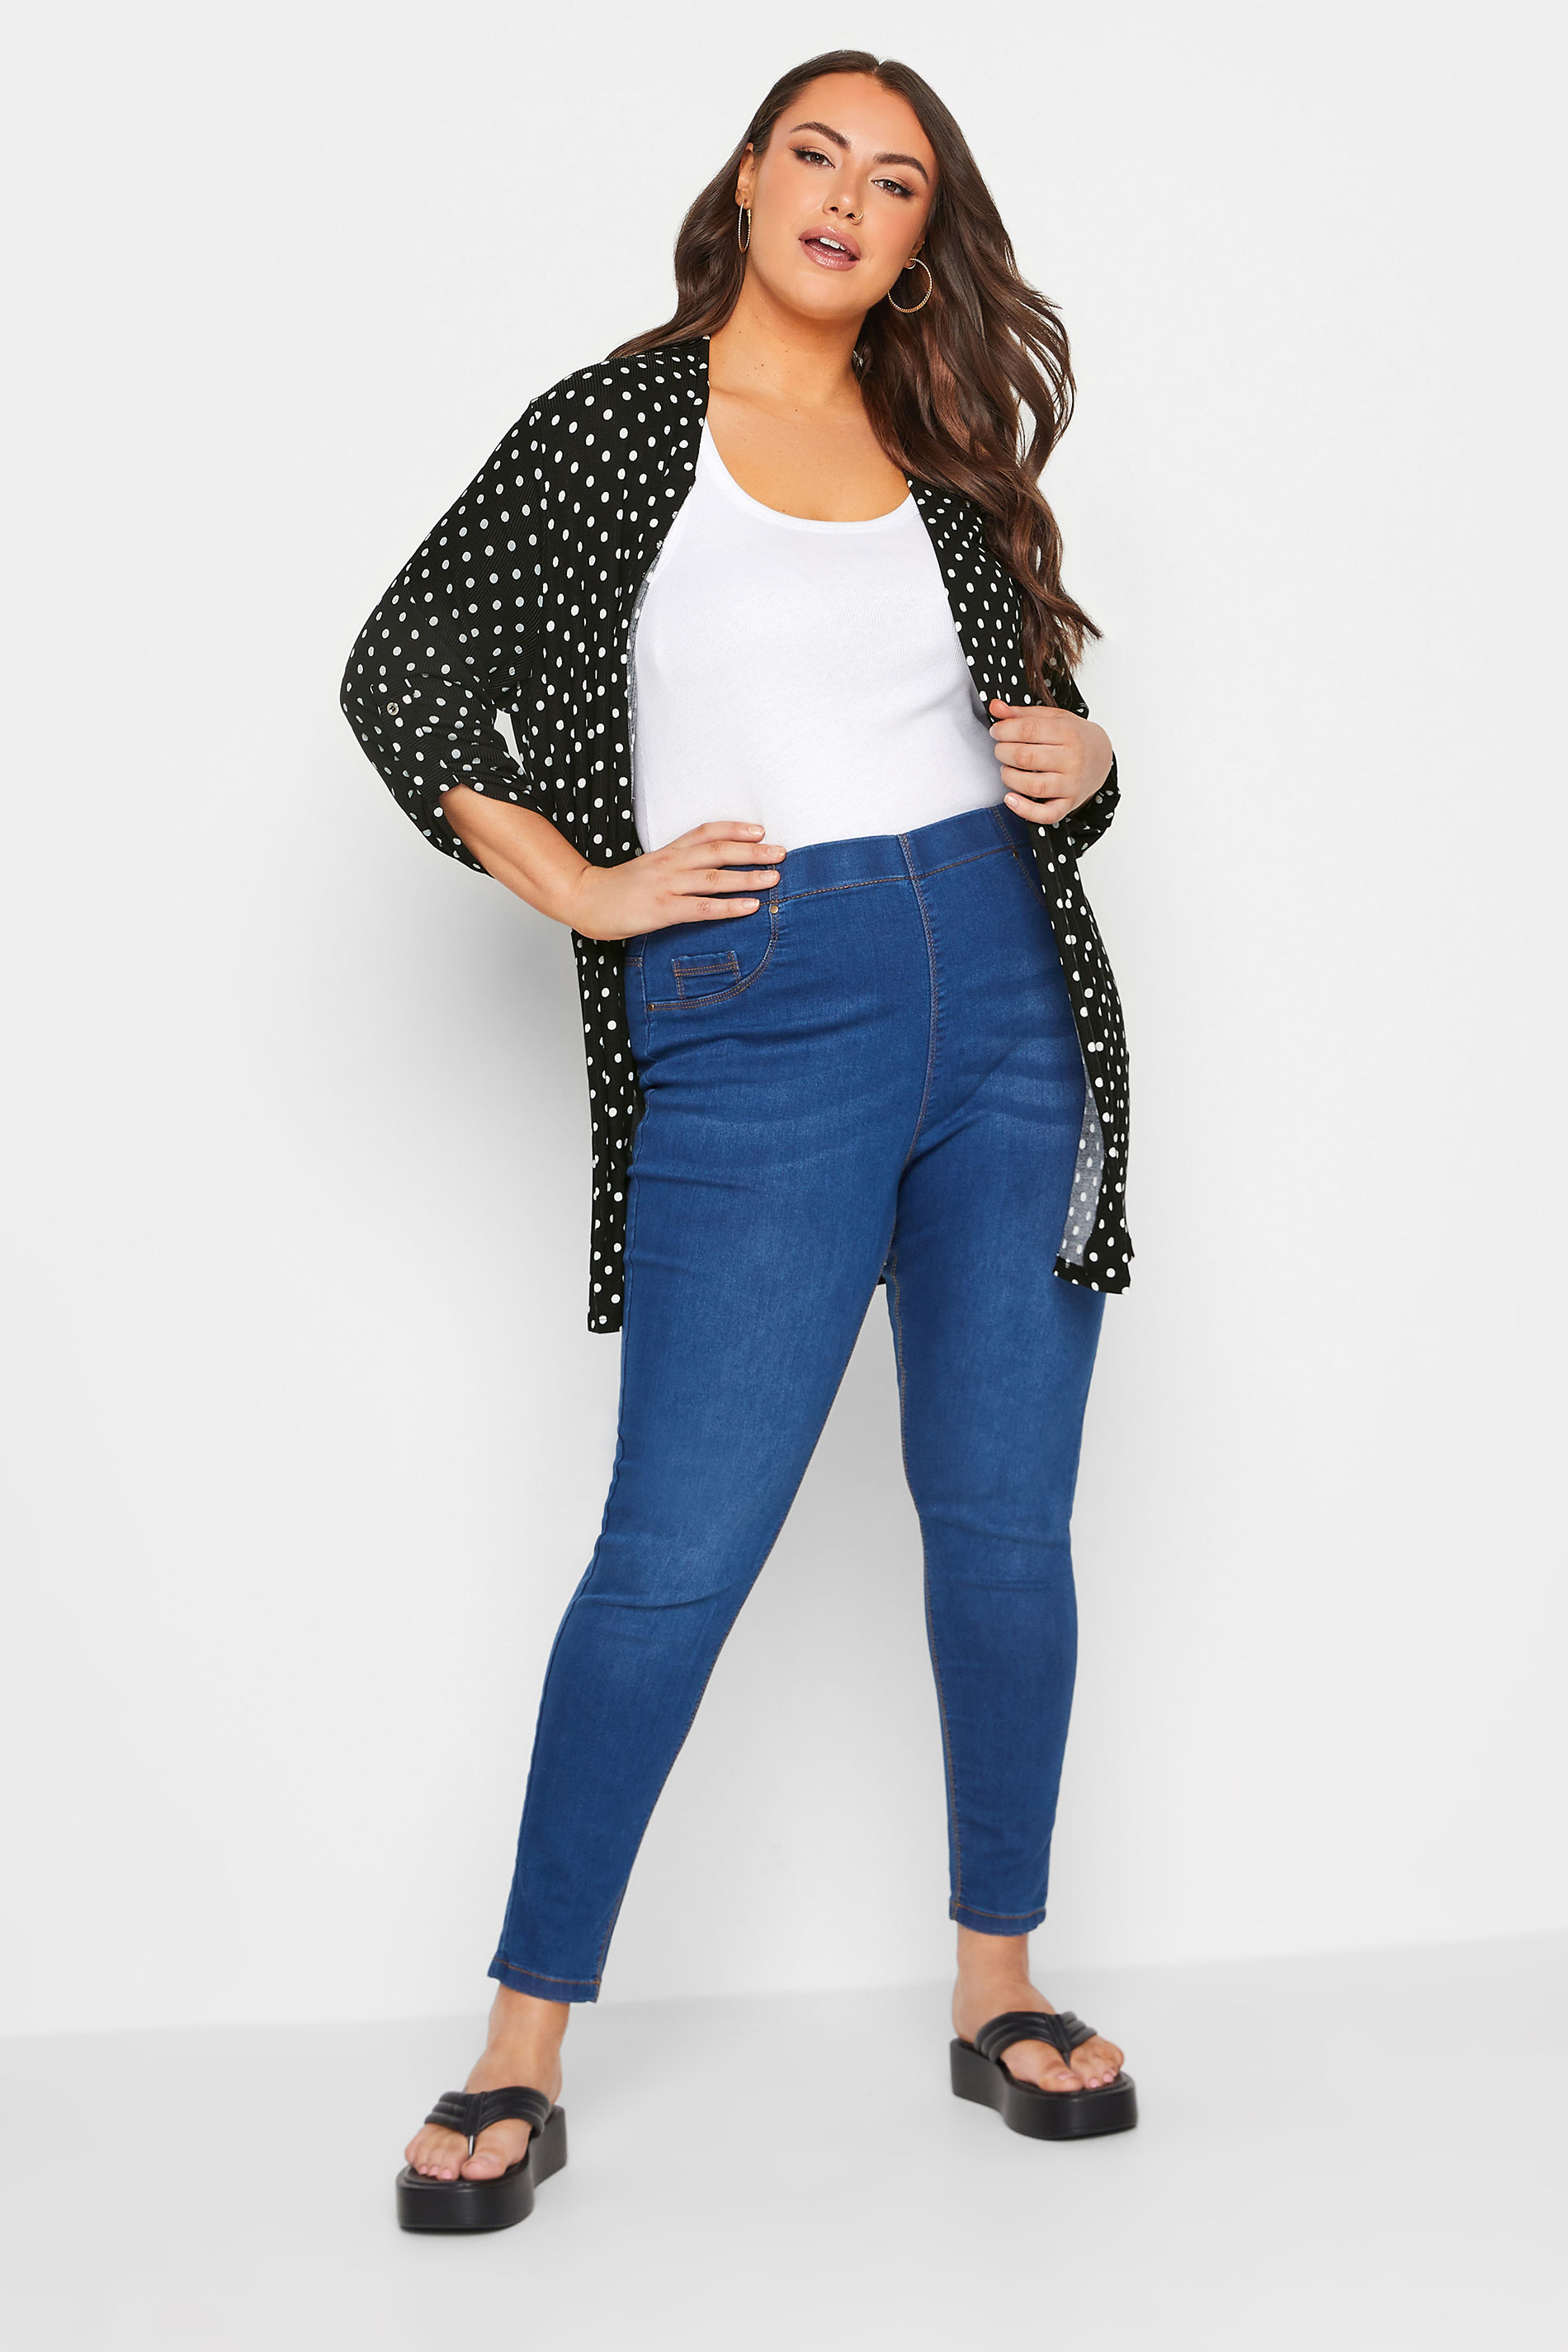 YOURS Curve Plus Size Black Polka Dot Cardigan | Yours Clothing  2